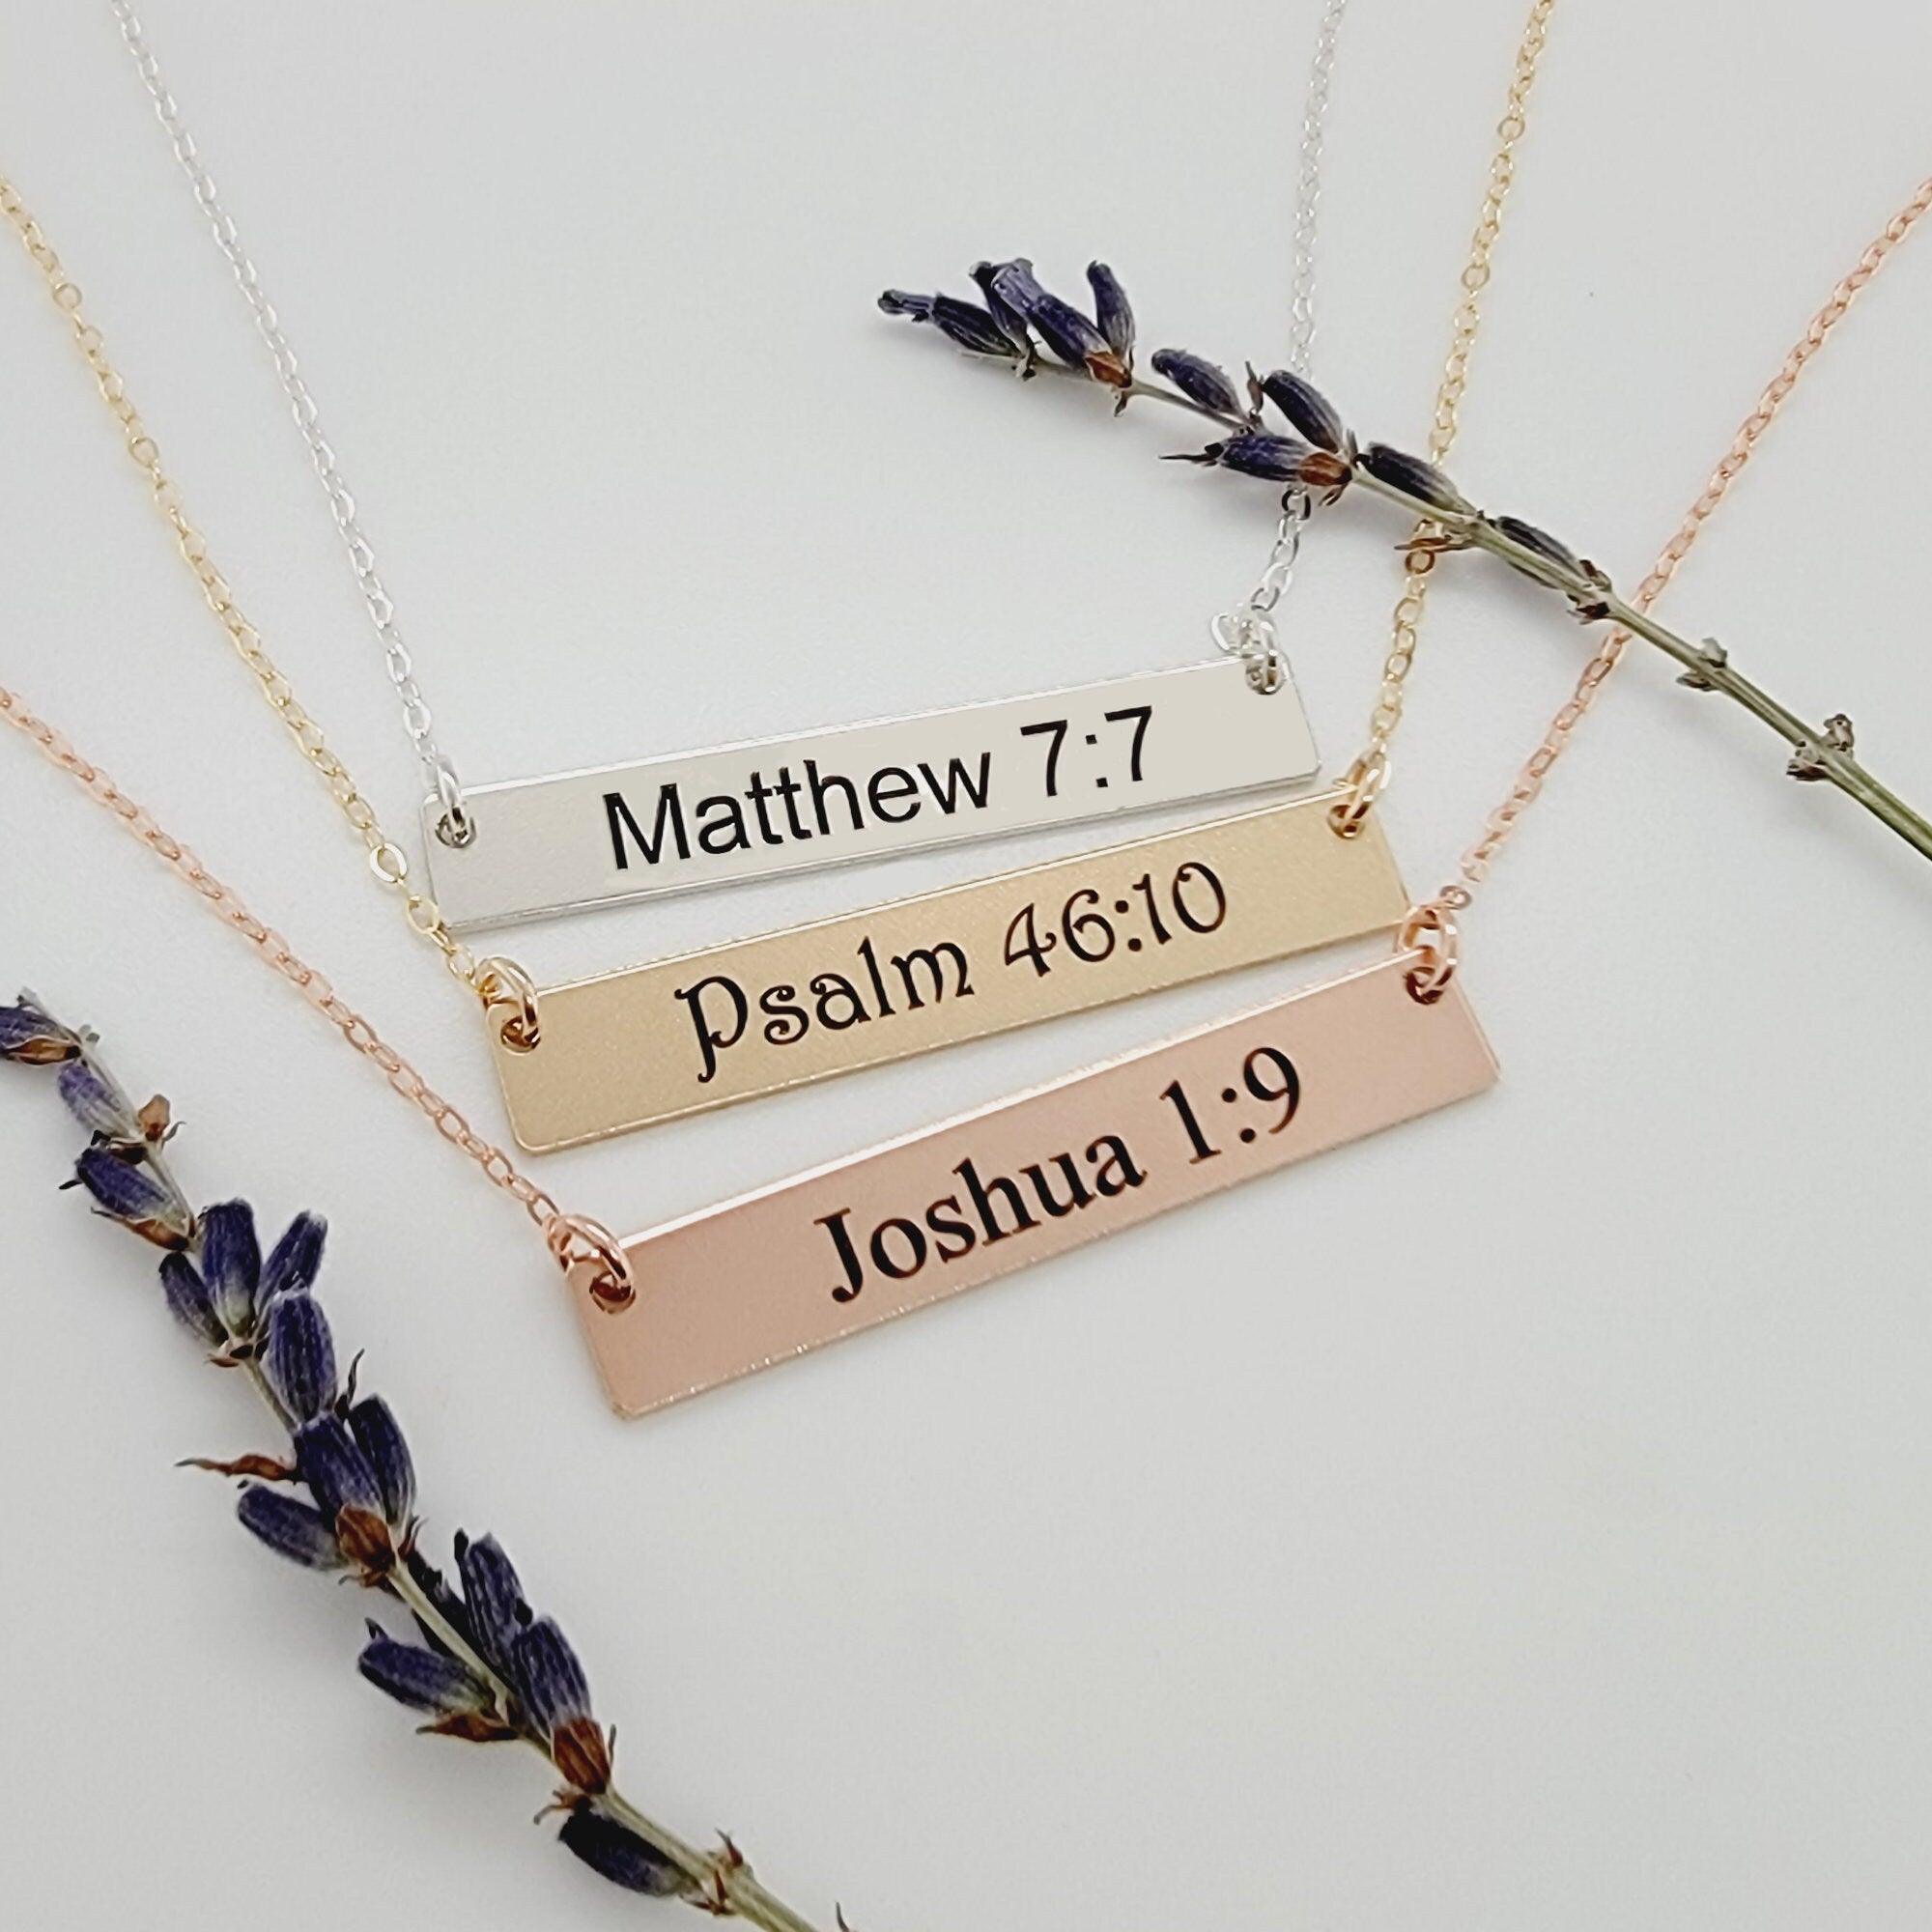 I Can Do All Things Through Christ Necklace Boho Style Bronze Jewelry for  Women, Chain 24 - Handmade Strength and Courage Bible Verse Pendant, Arrow